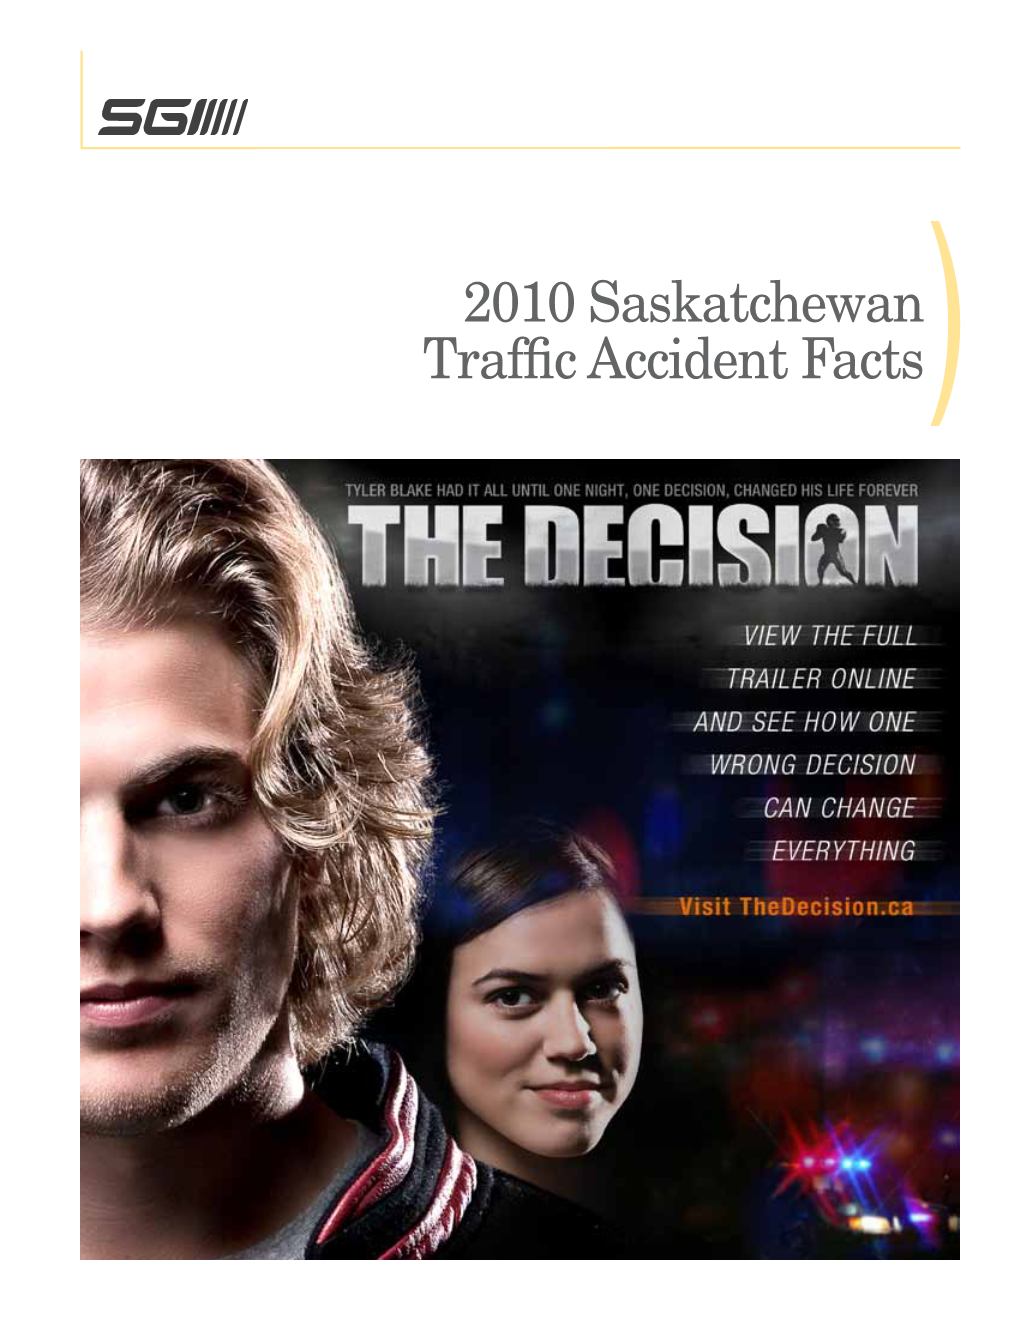 2010 Saskatchewan Traffic Accident Facts 2010 QUICK FACTS (2010 Compared to 2009)